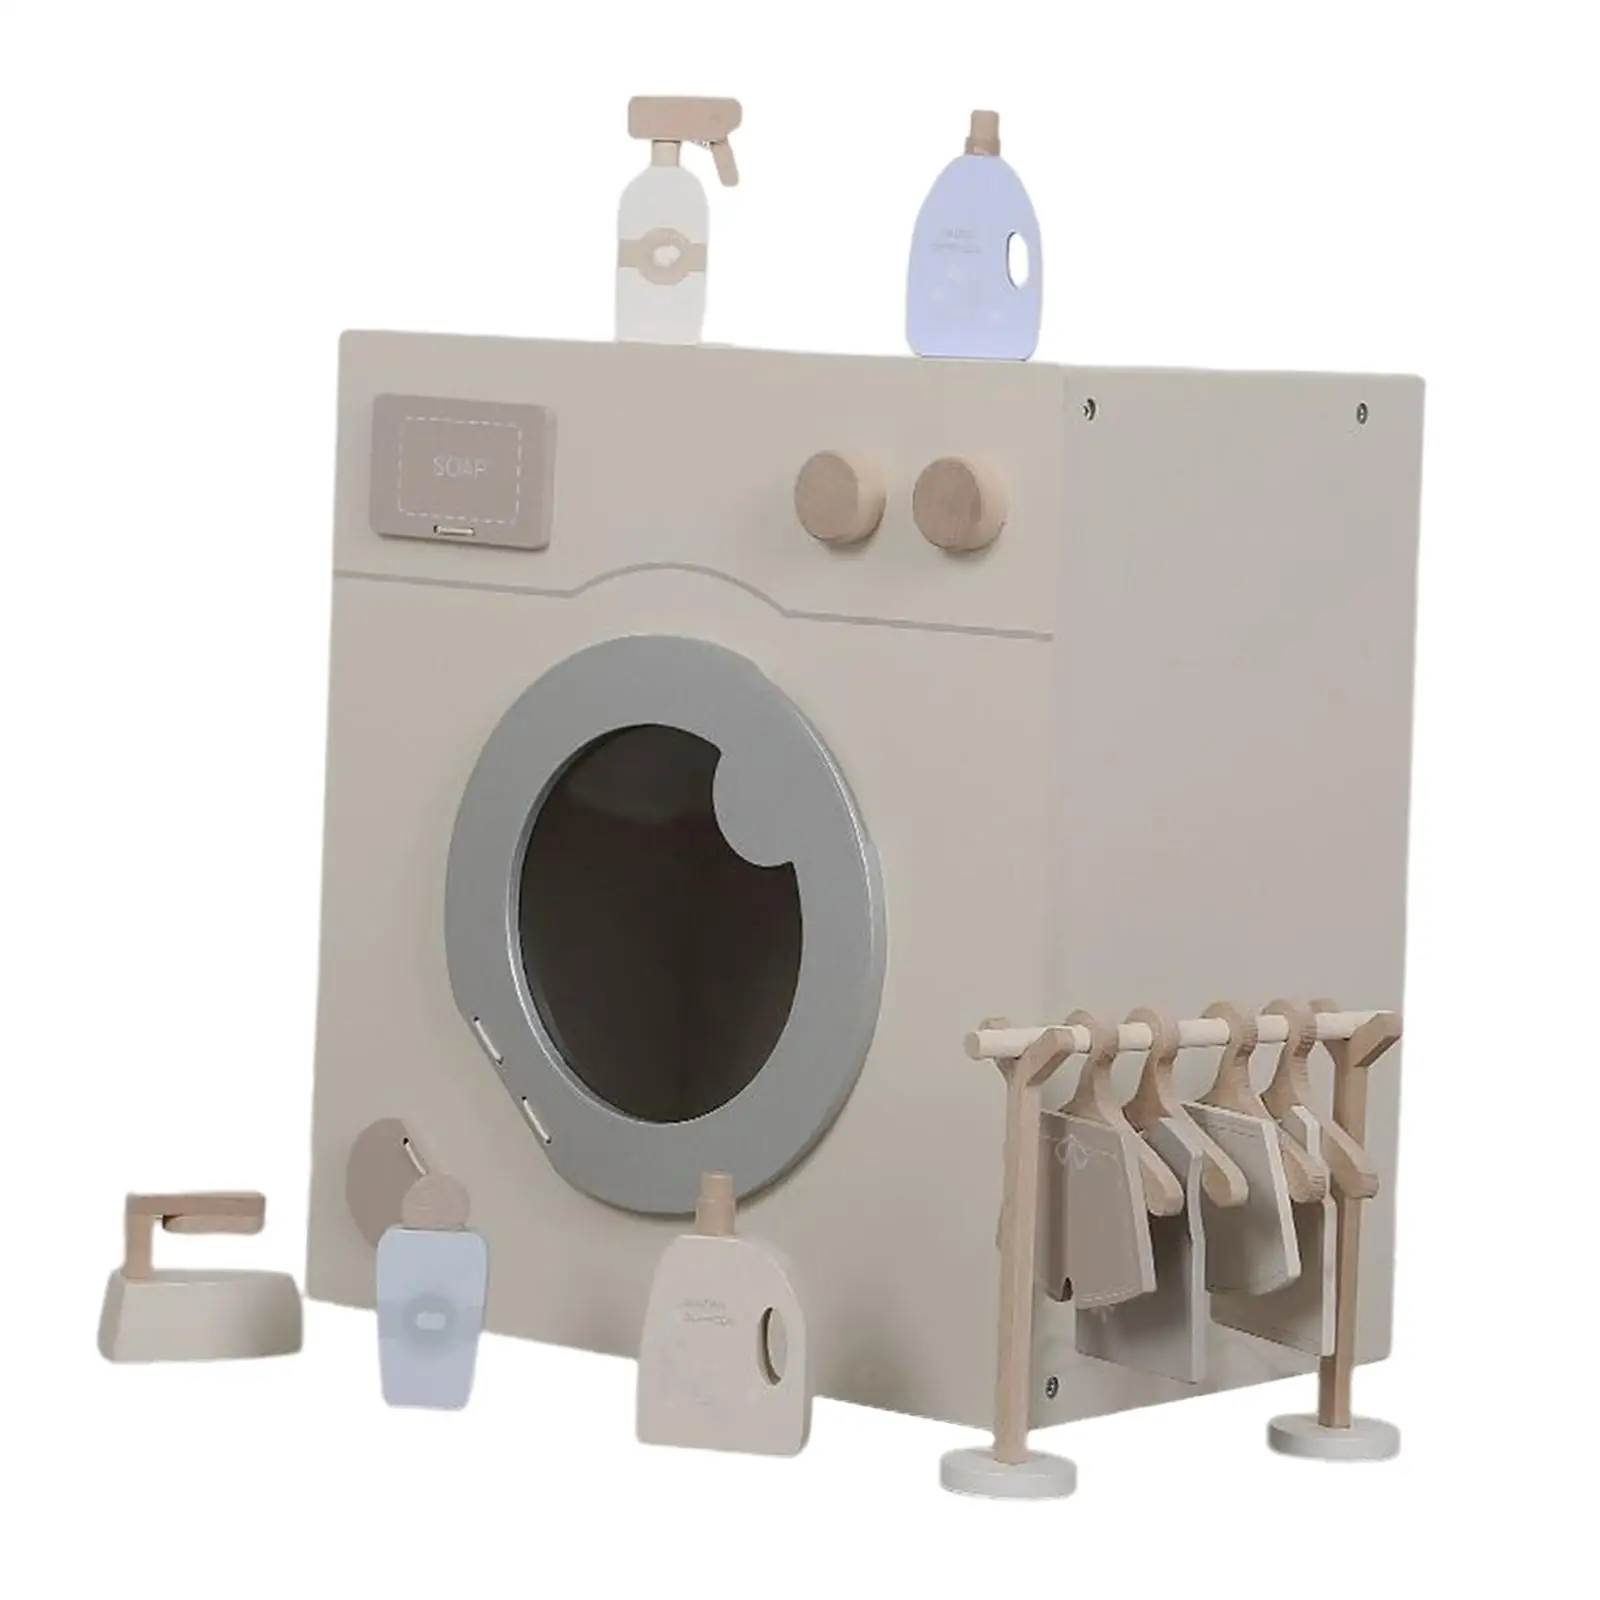 Wooden Washing Machine Playset Appliance Pretend Play Interactive Toy with